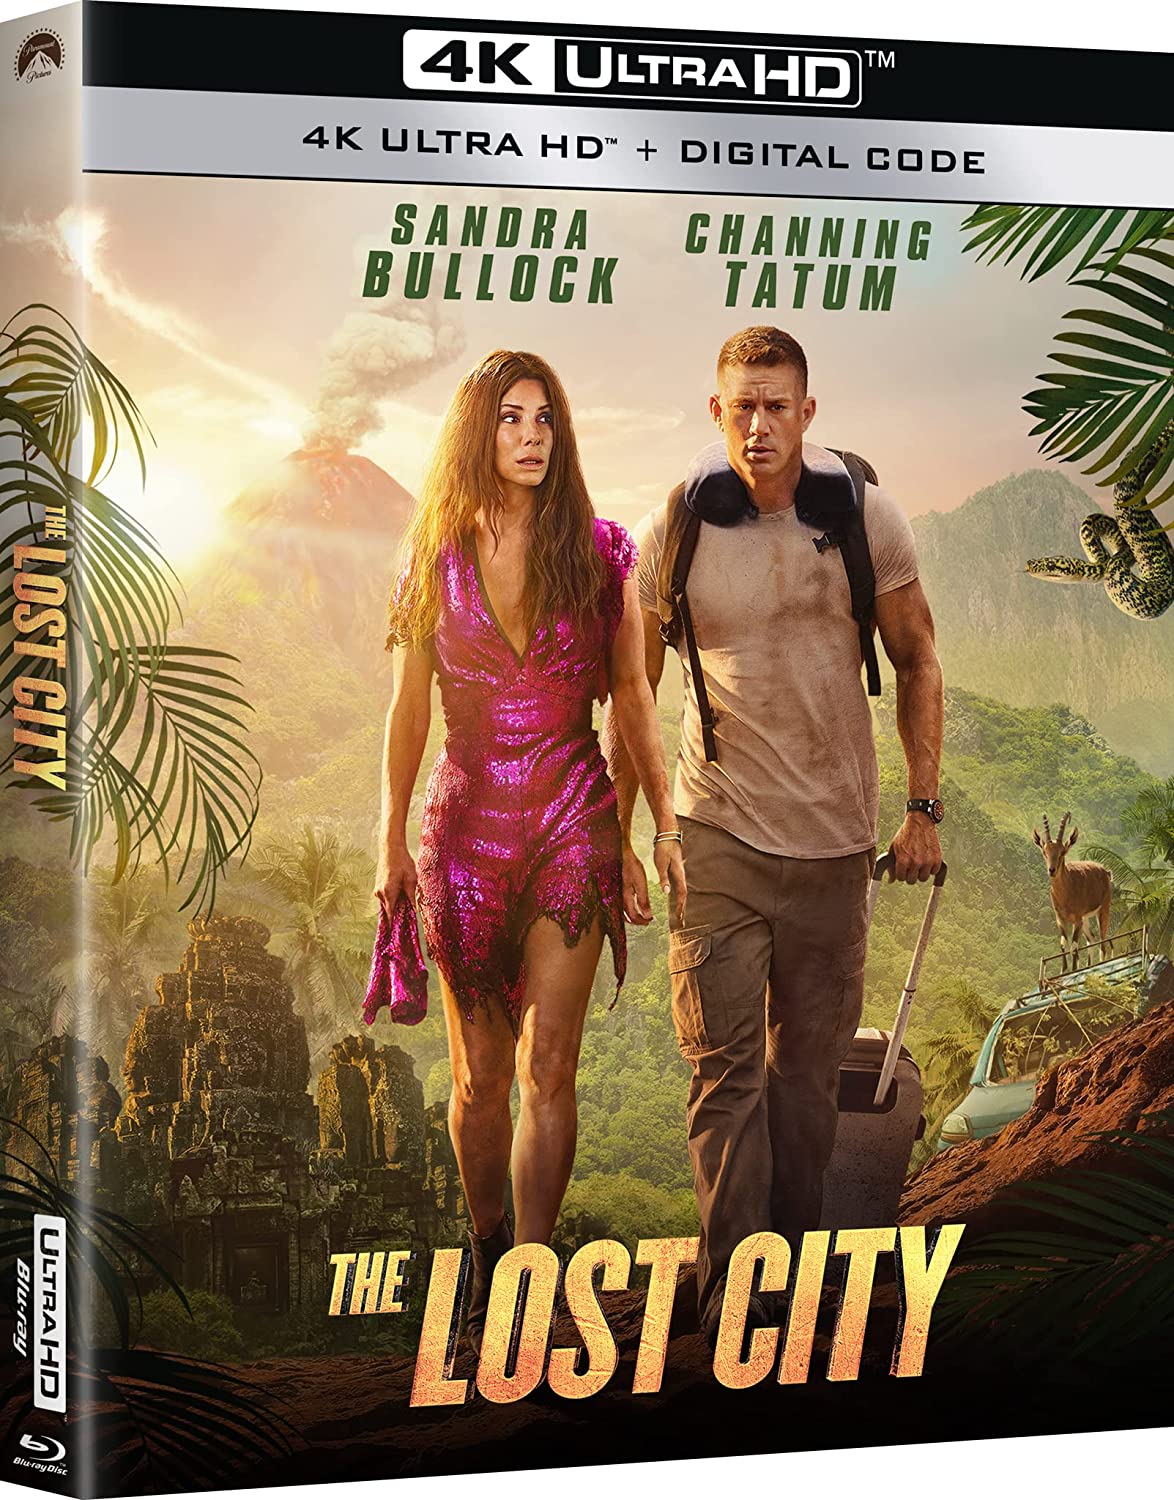 The Lost City 4k Blu-ray